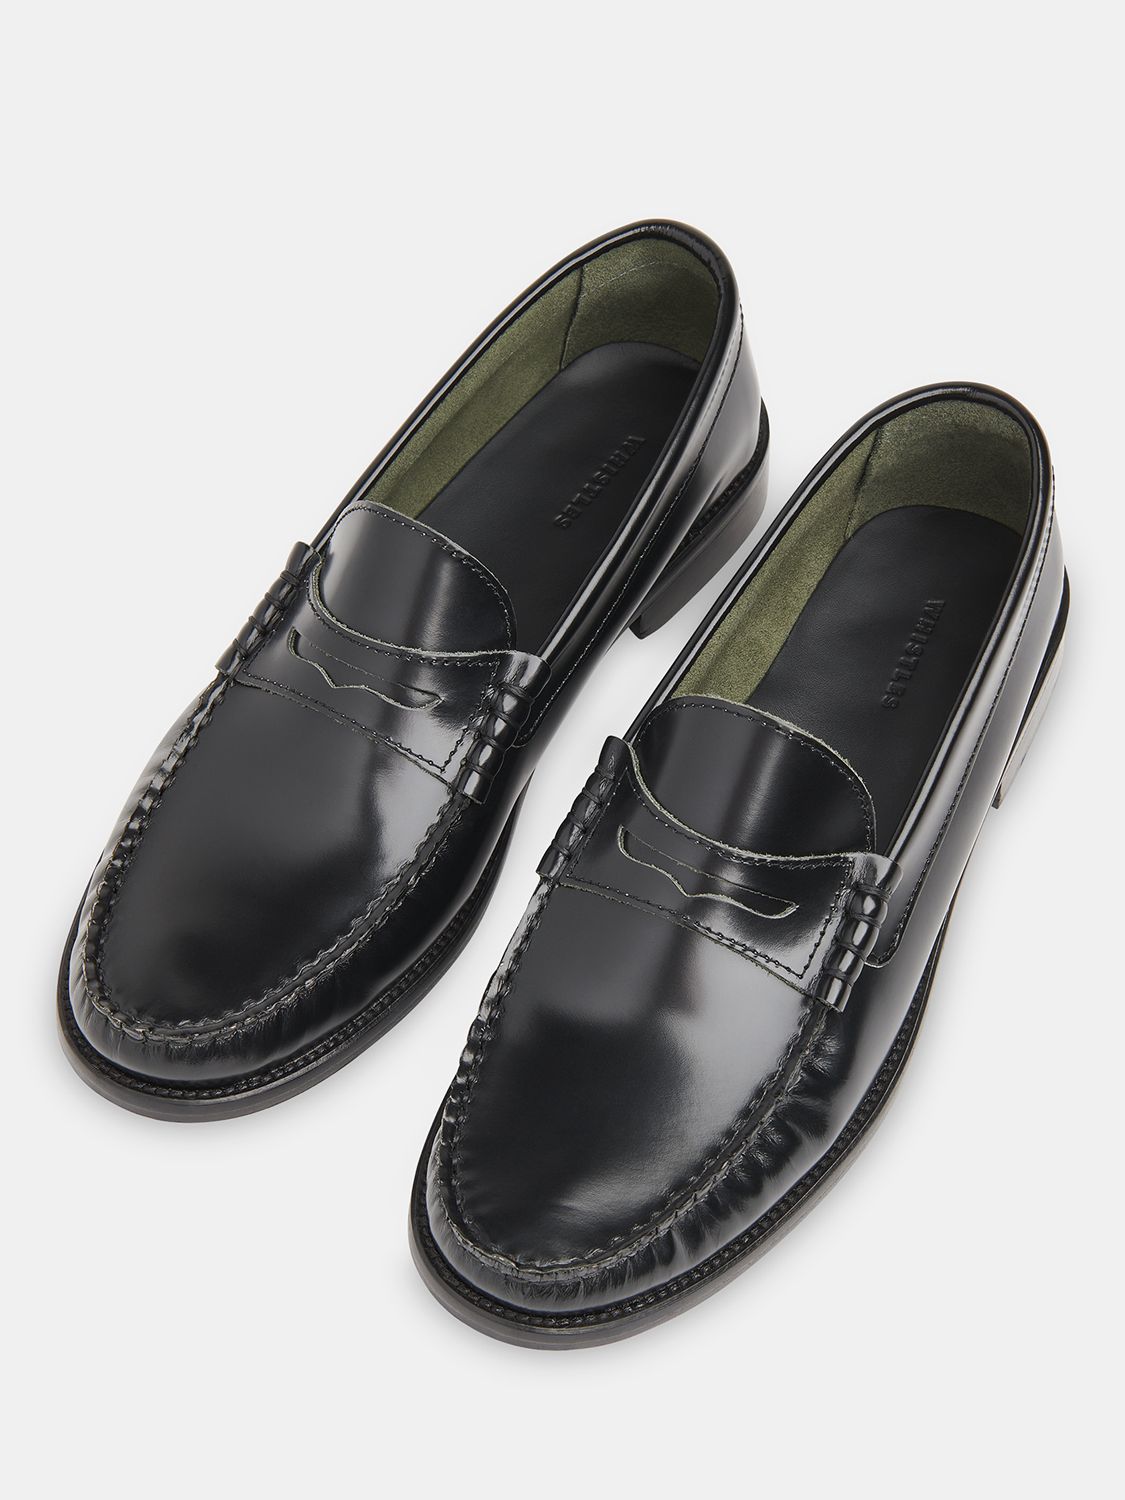 Whistles Manny Leather Loafers, Black at John Lewis & Partners